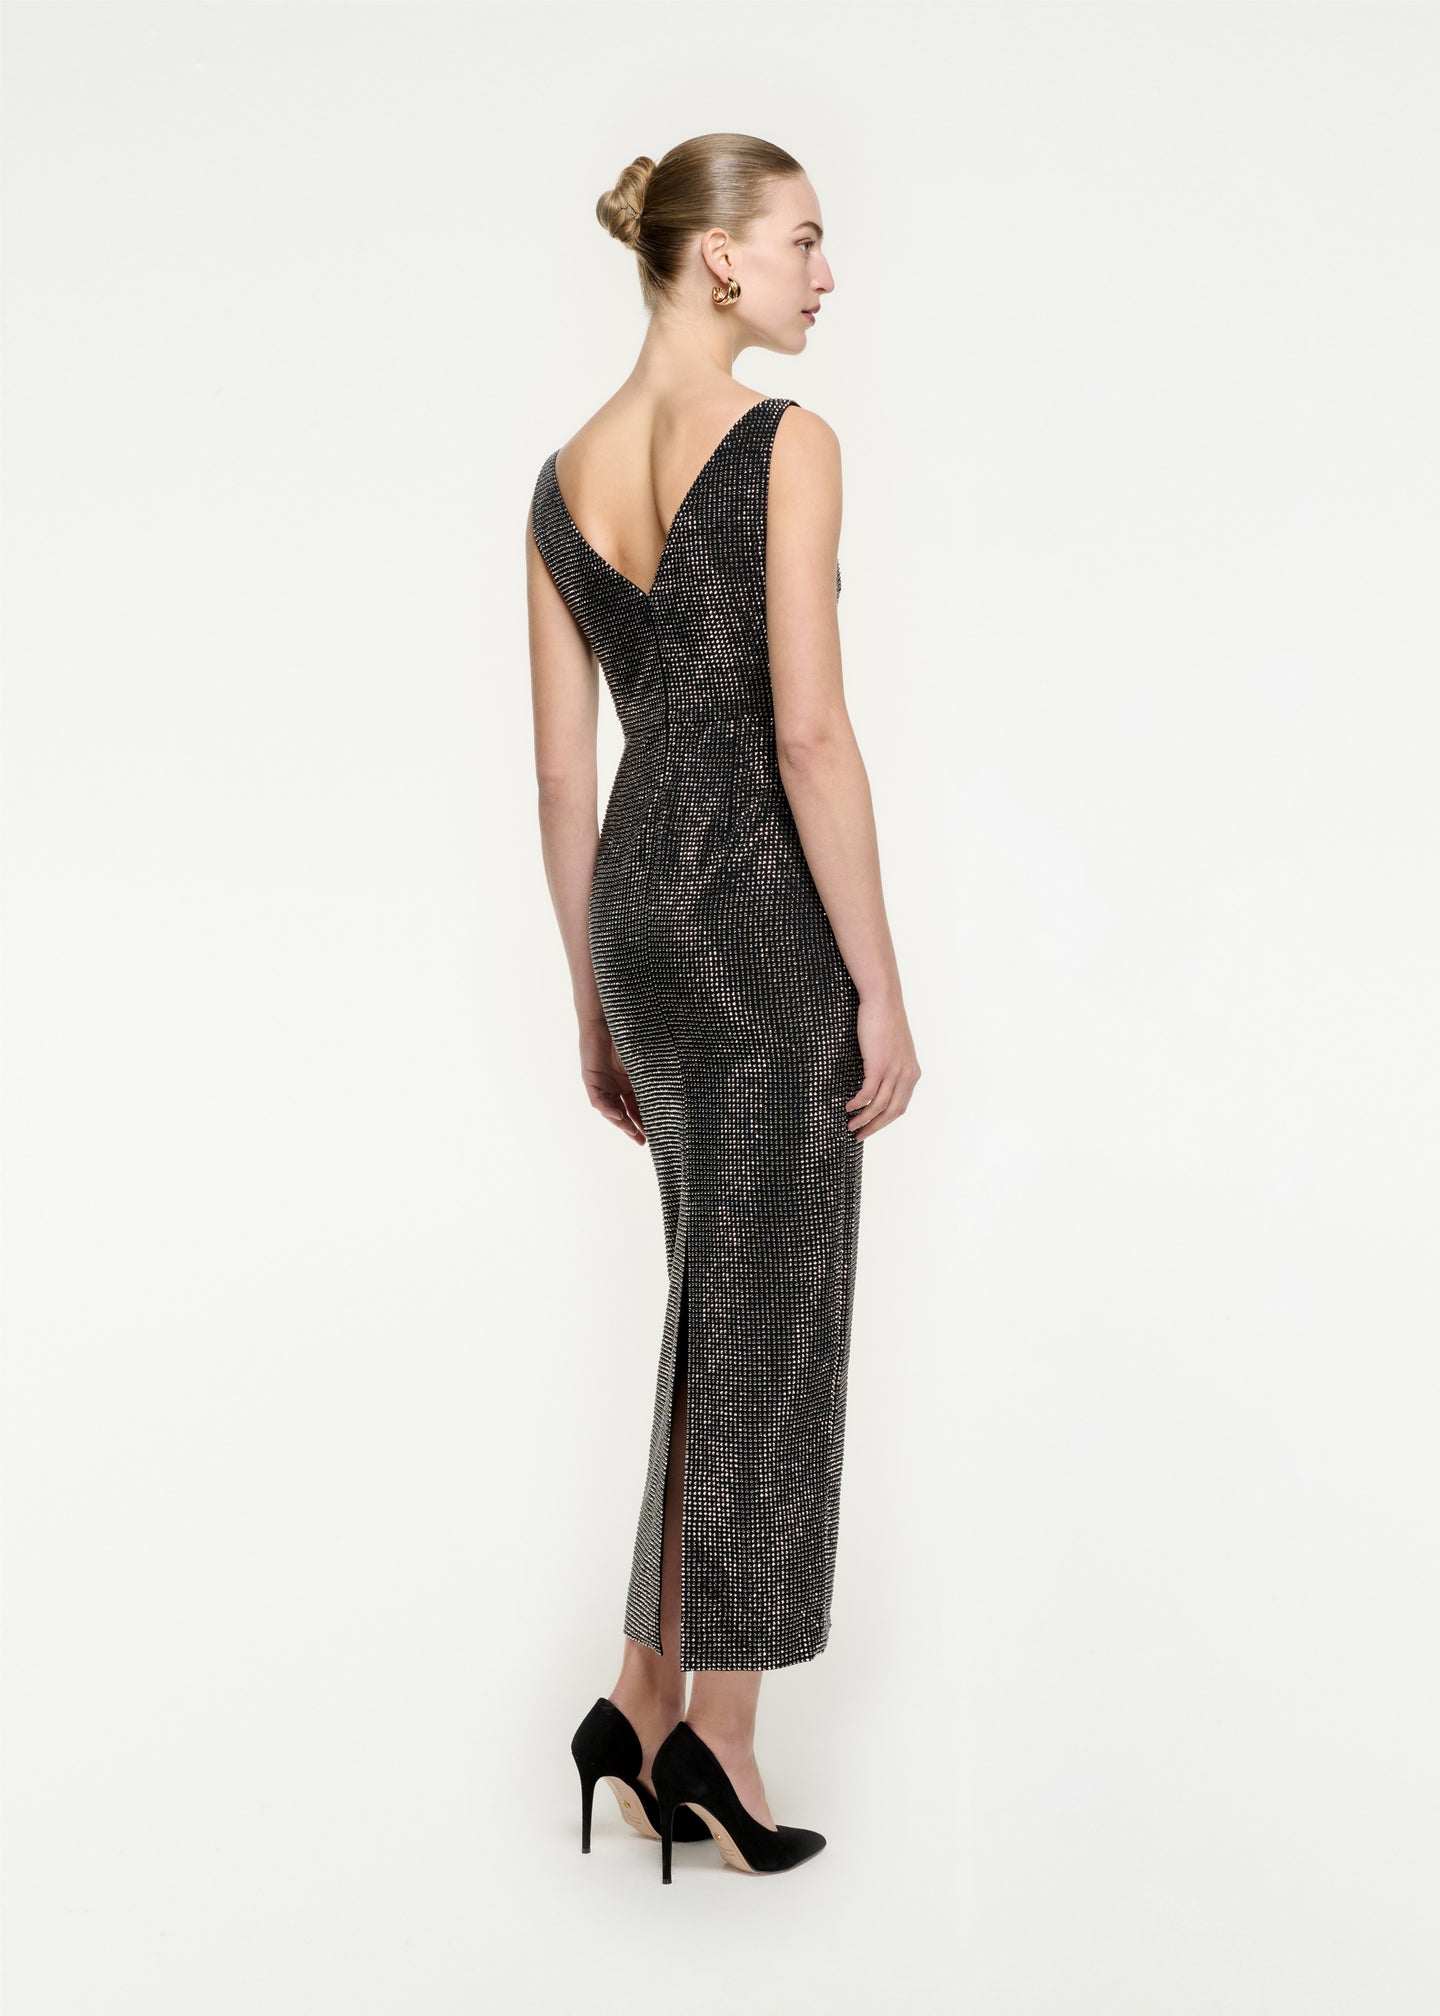 The back of a woman wearing the Diamante Maxi Dress in Black